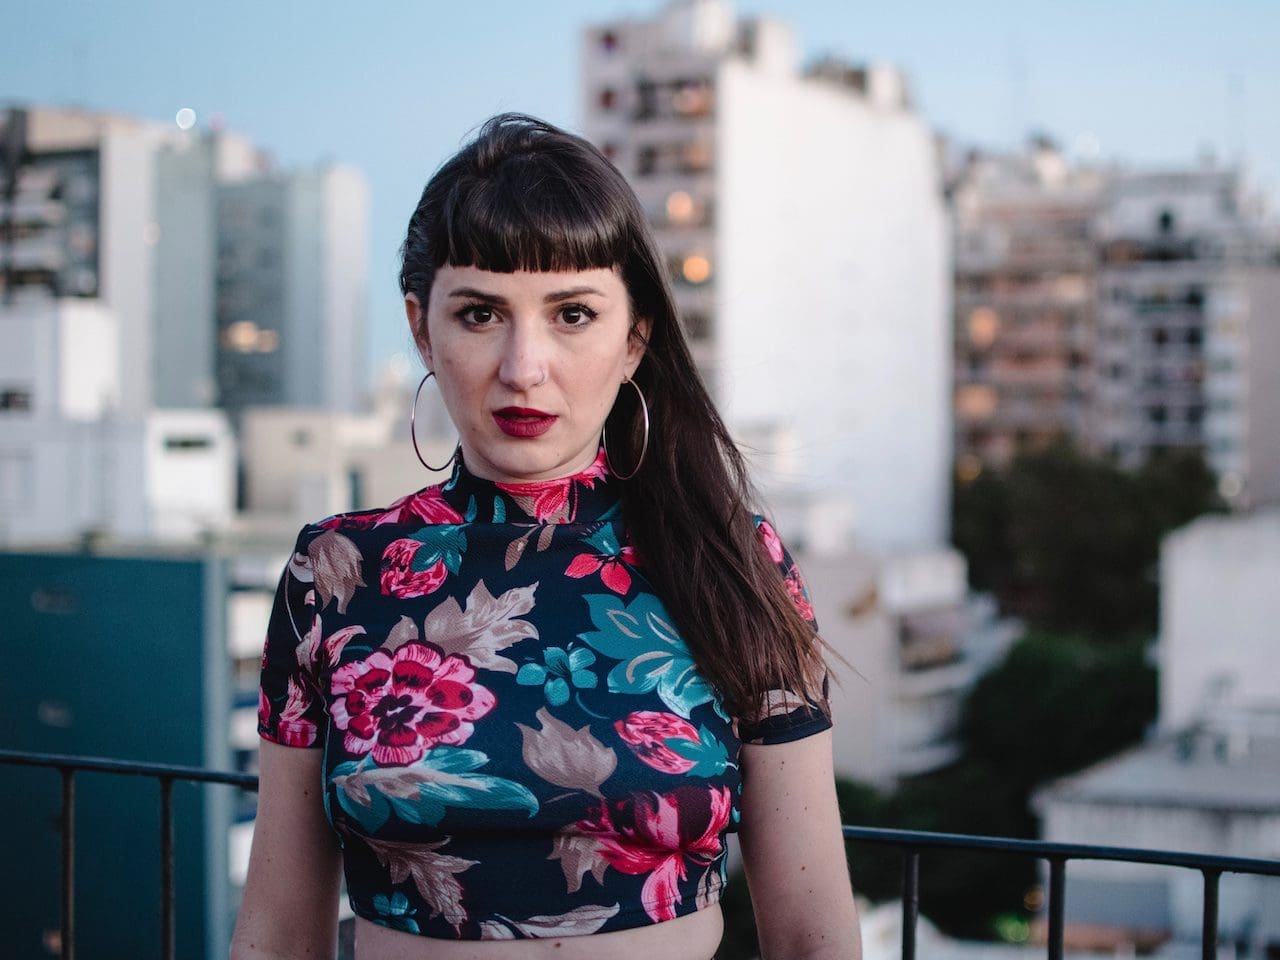 Argentine Tango singer breaks gender barriers, forms feminist band pic